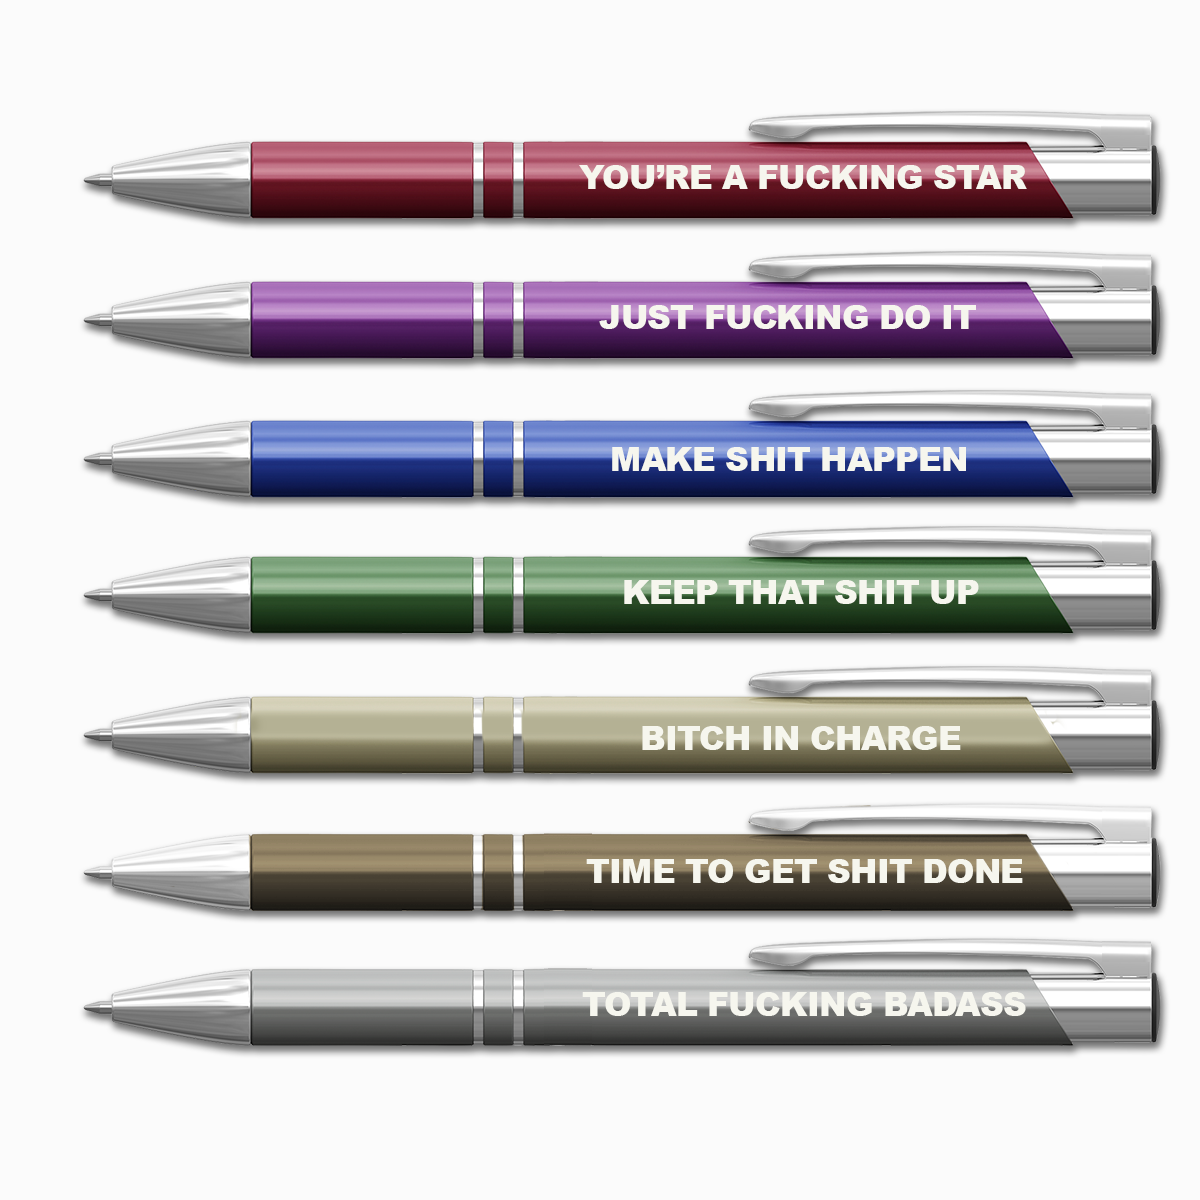 Fresh Out of Give A Fuck Pen Funny Pens Motivational Writing Tools